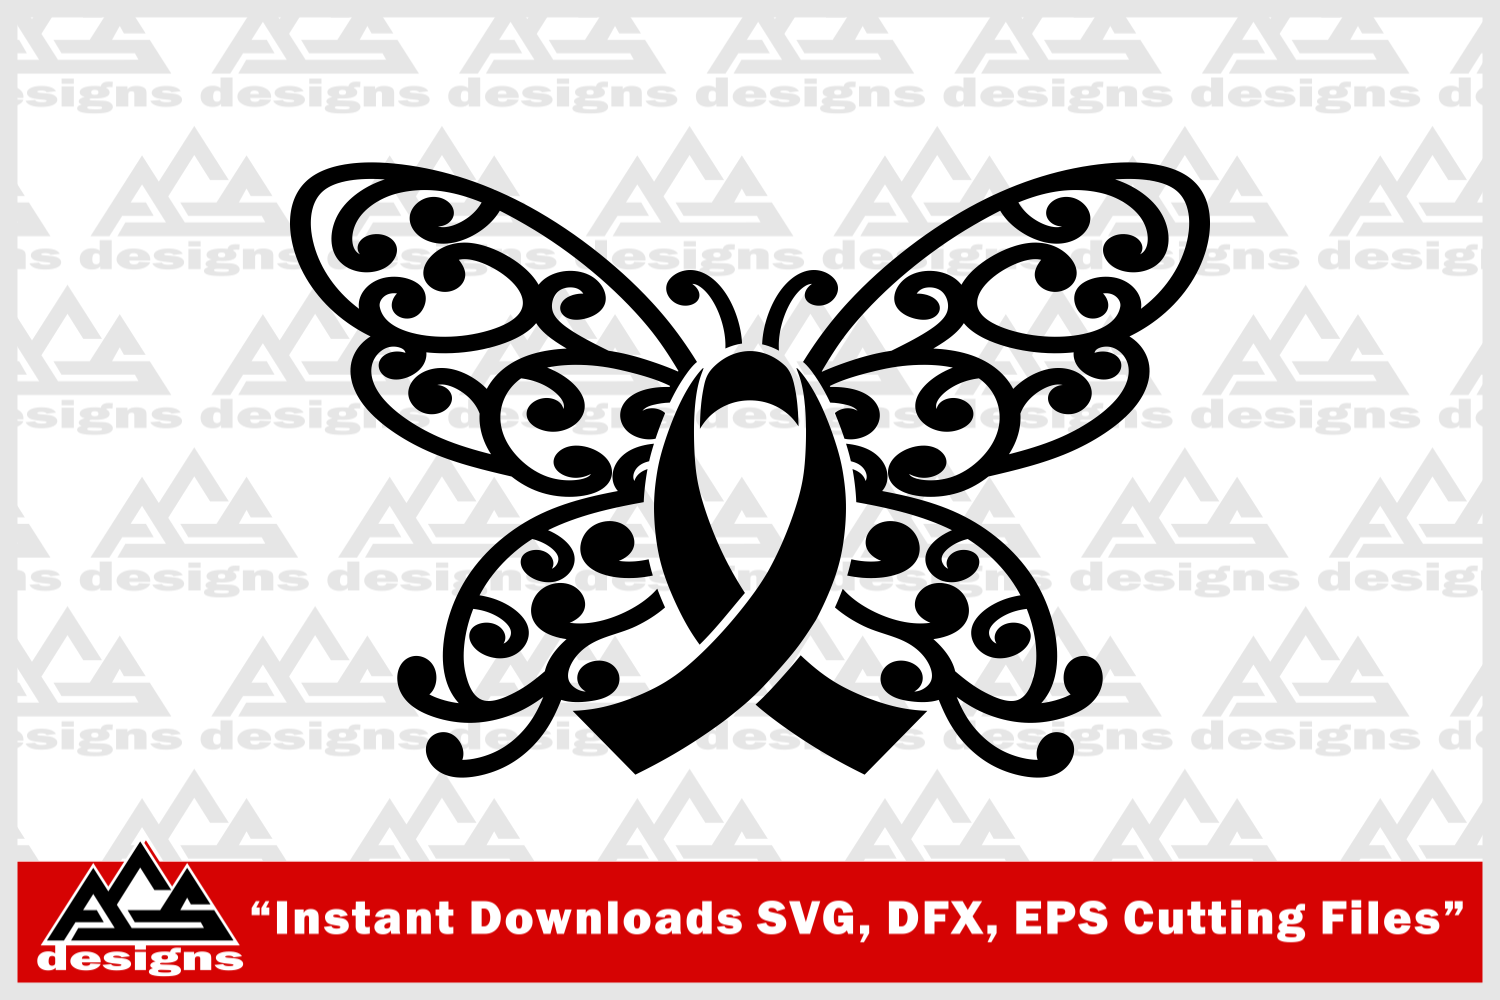 Download Butterfly Cancer Awareness Ribbon Svg Design By Agsdesign Thehungryjpeg Com